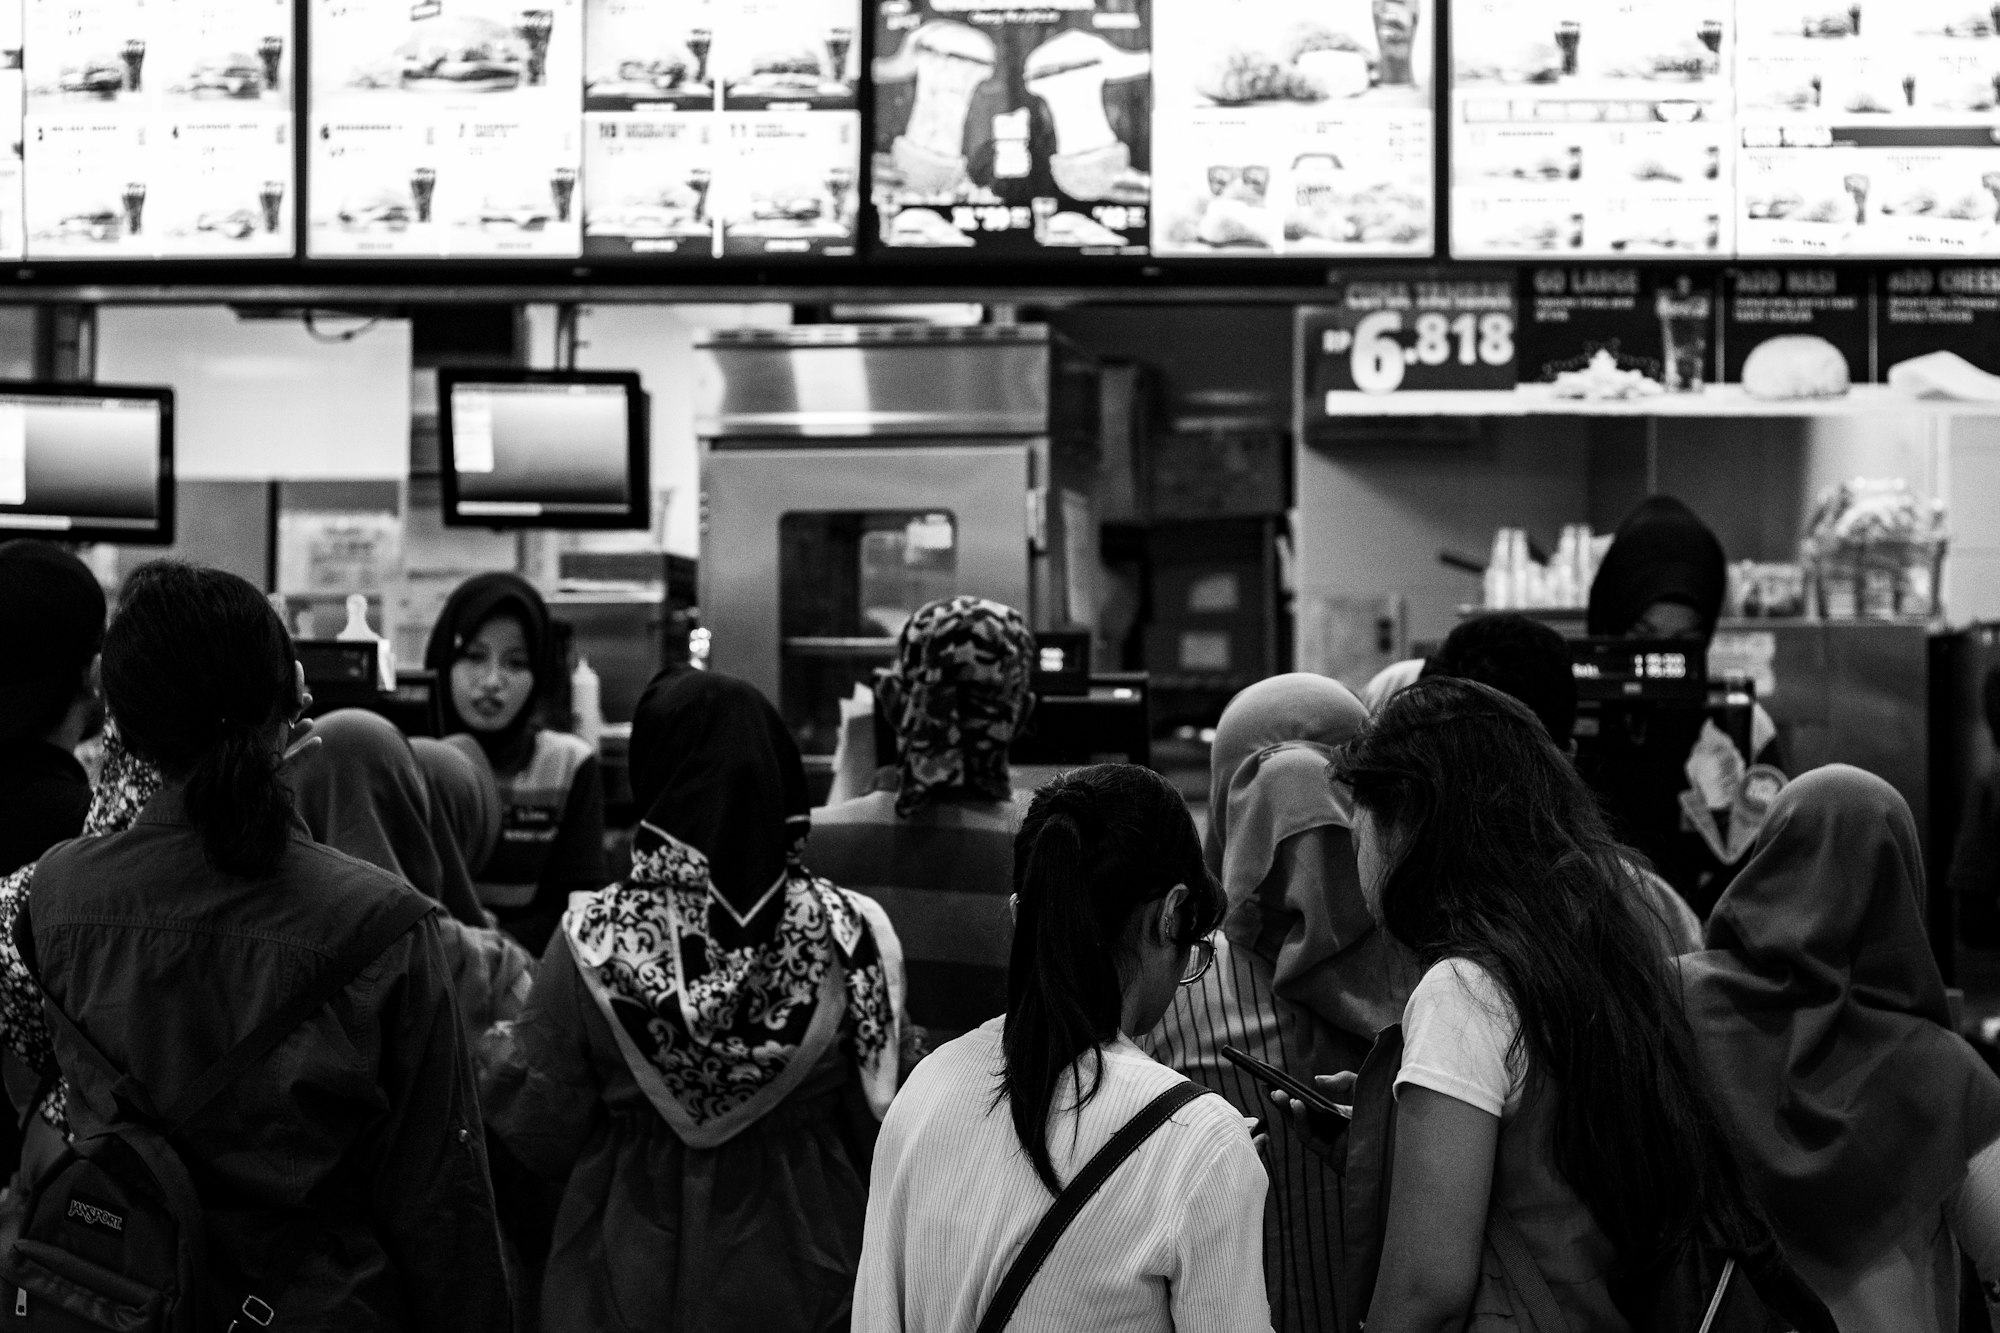 Distracted queue in fast food restaurant. Can you see the line which is better?